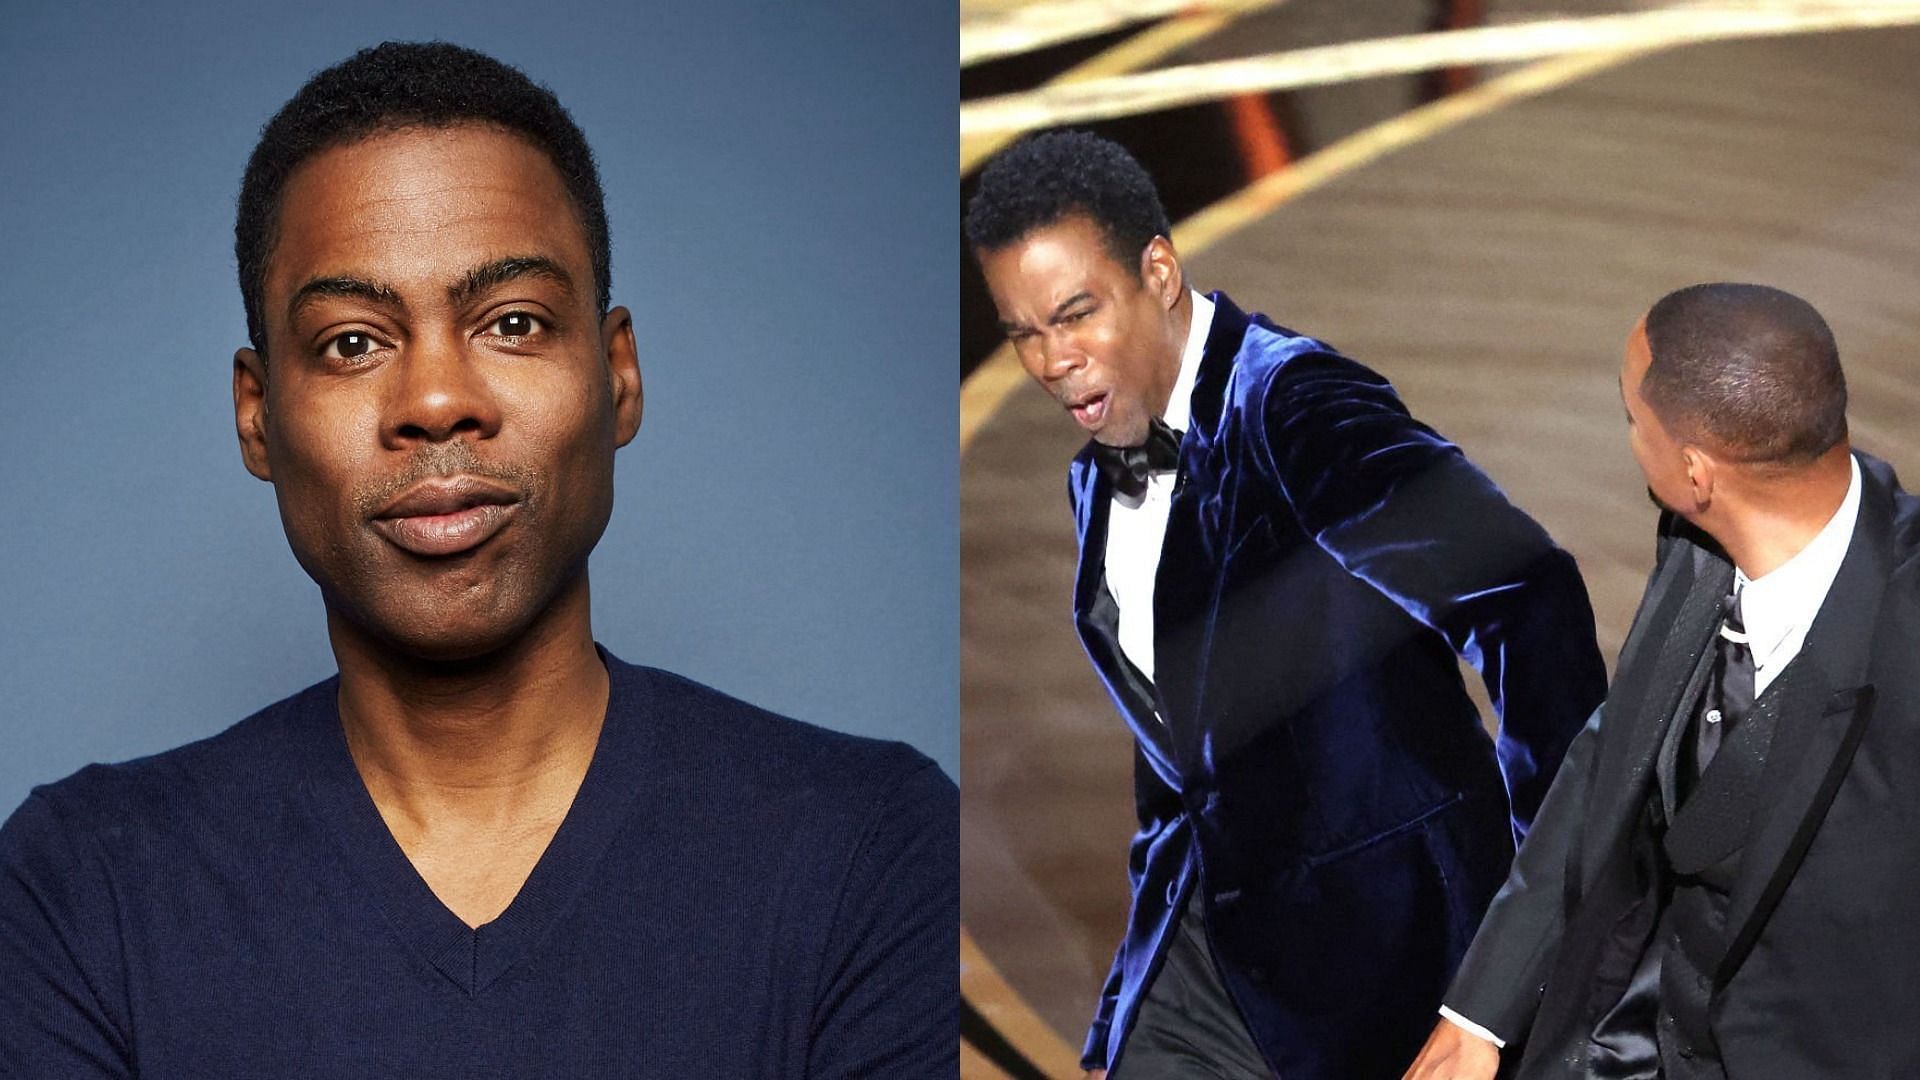 Chris Rock mentioned he was &quot;still processing&quot; Will Smith&#039;s slapping incident (Image via Mike McGregor/Getty Images and Myung Chun/Getty Images)